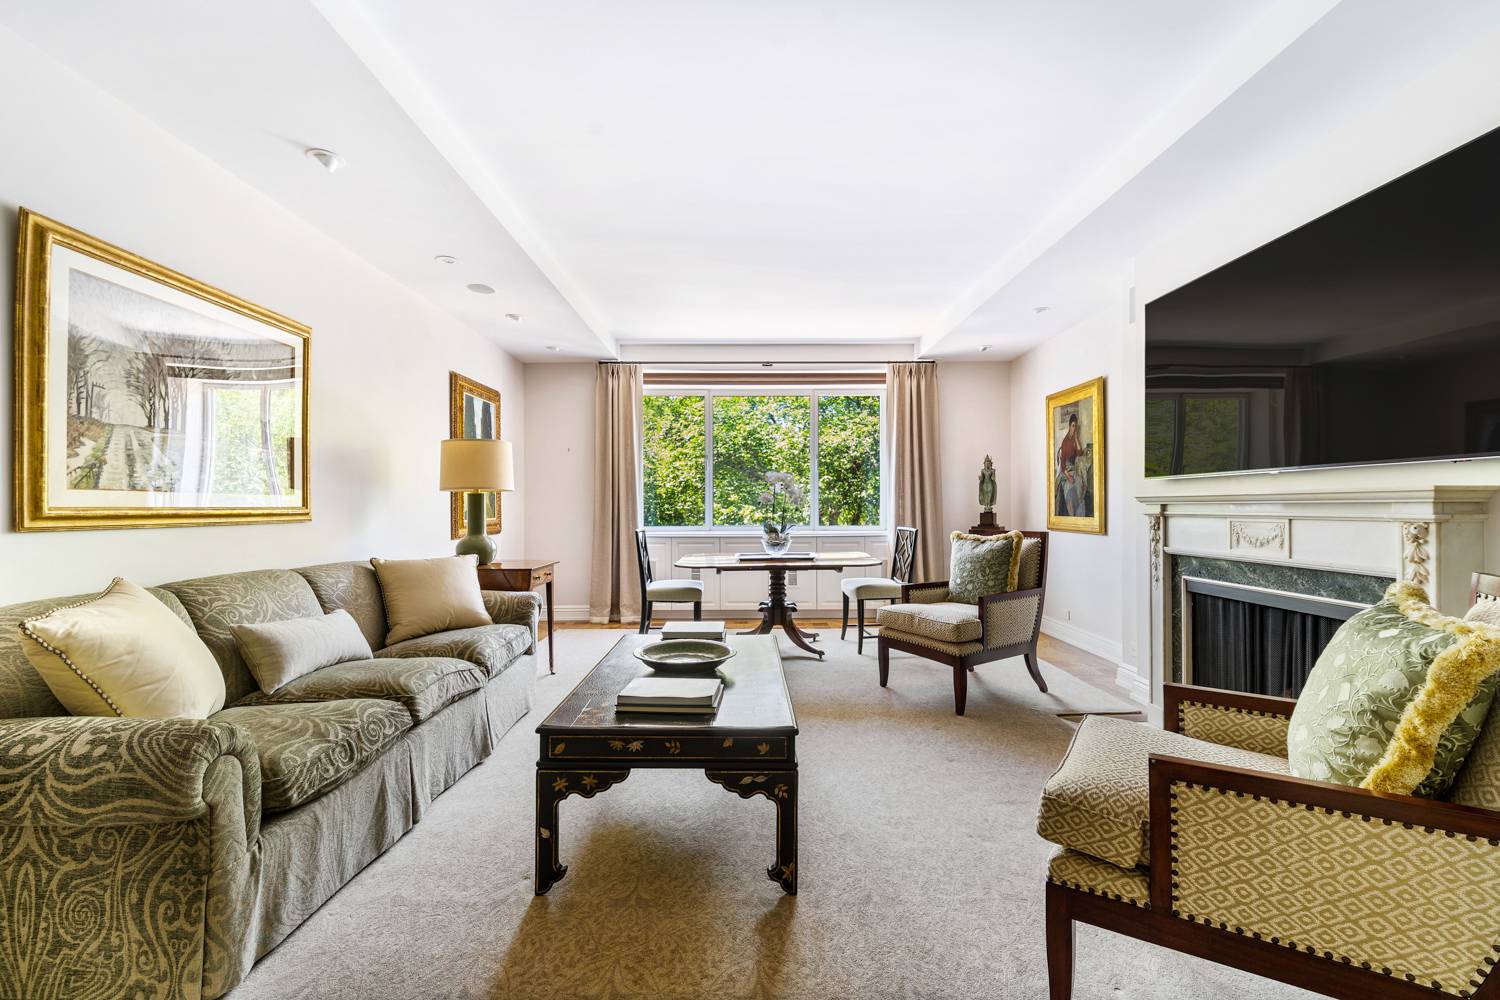 The Ultimate Luxury Apartment that checks all the boxes 3 bedrooms in the most prime location 5th Avenue and 76th Street with Central Park views from a 26.